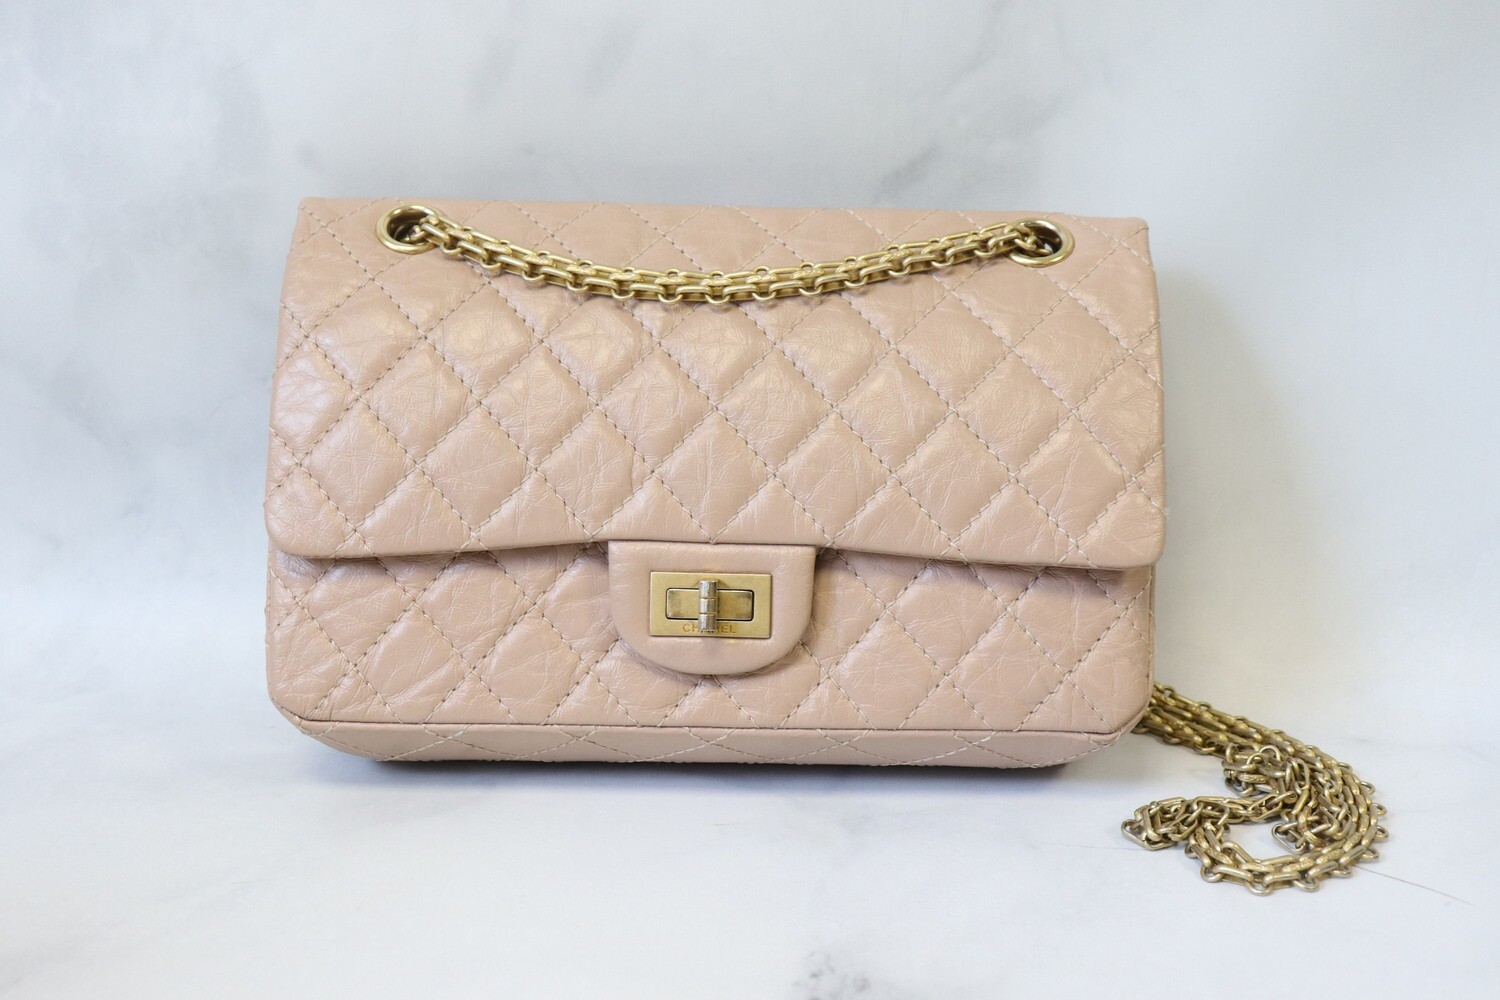 Chanel Reissue 225 Beige Calfskin Leather, Antique Gold Hardware, Preowned  in Dustbag